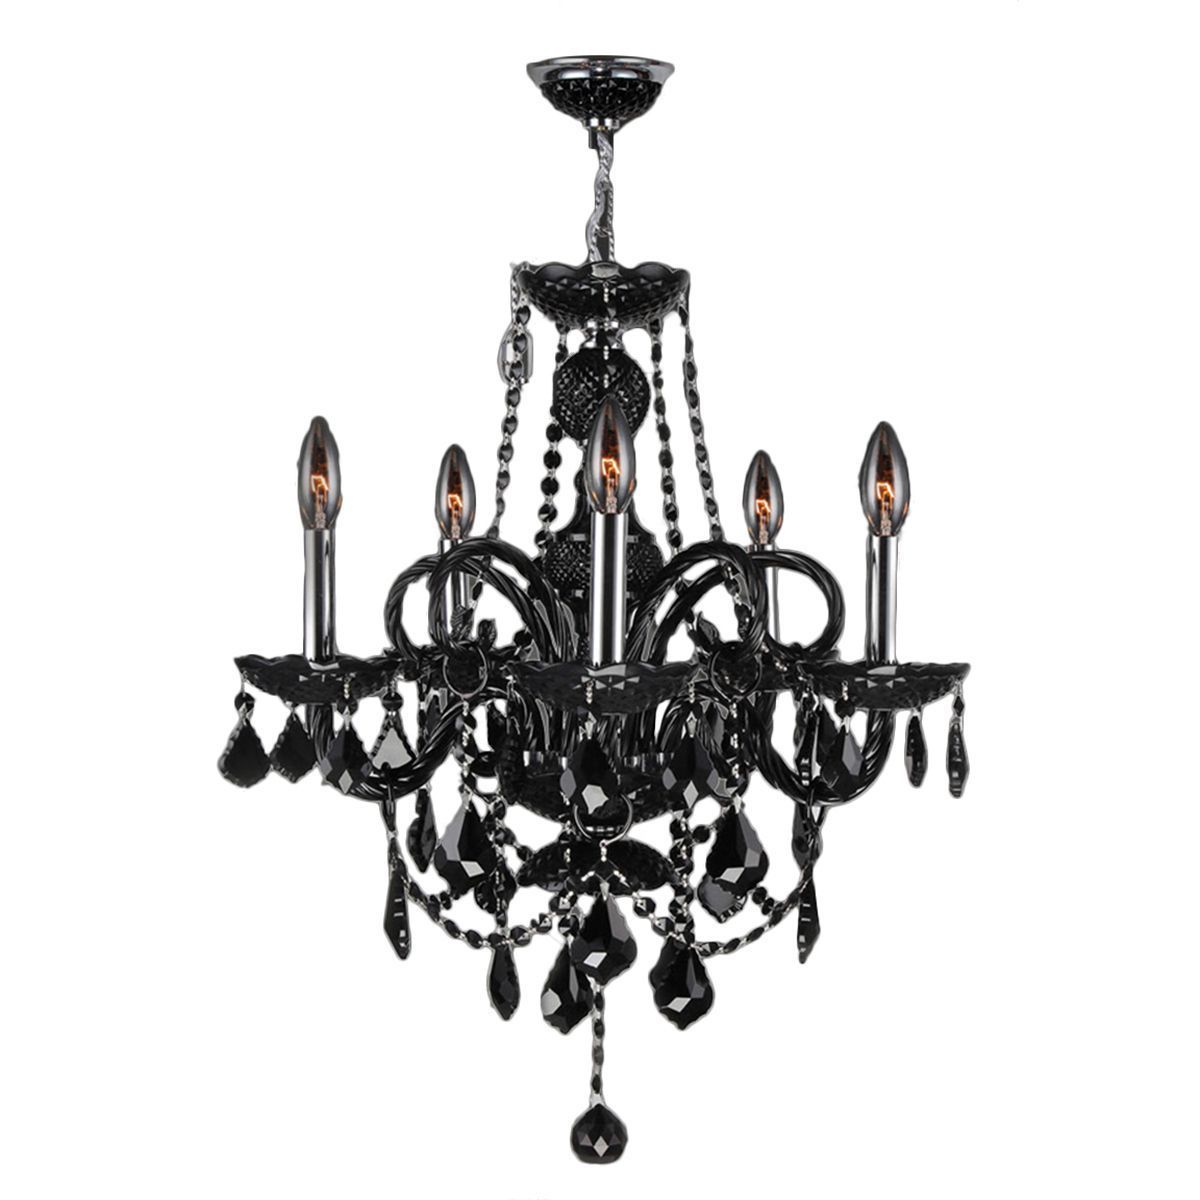 Mckamey 4 Light Crystal Chandeliers Within Well Known Venetian Italian Style 5 Light Chrome Finish And Black (View 23 of 25)